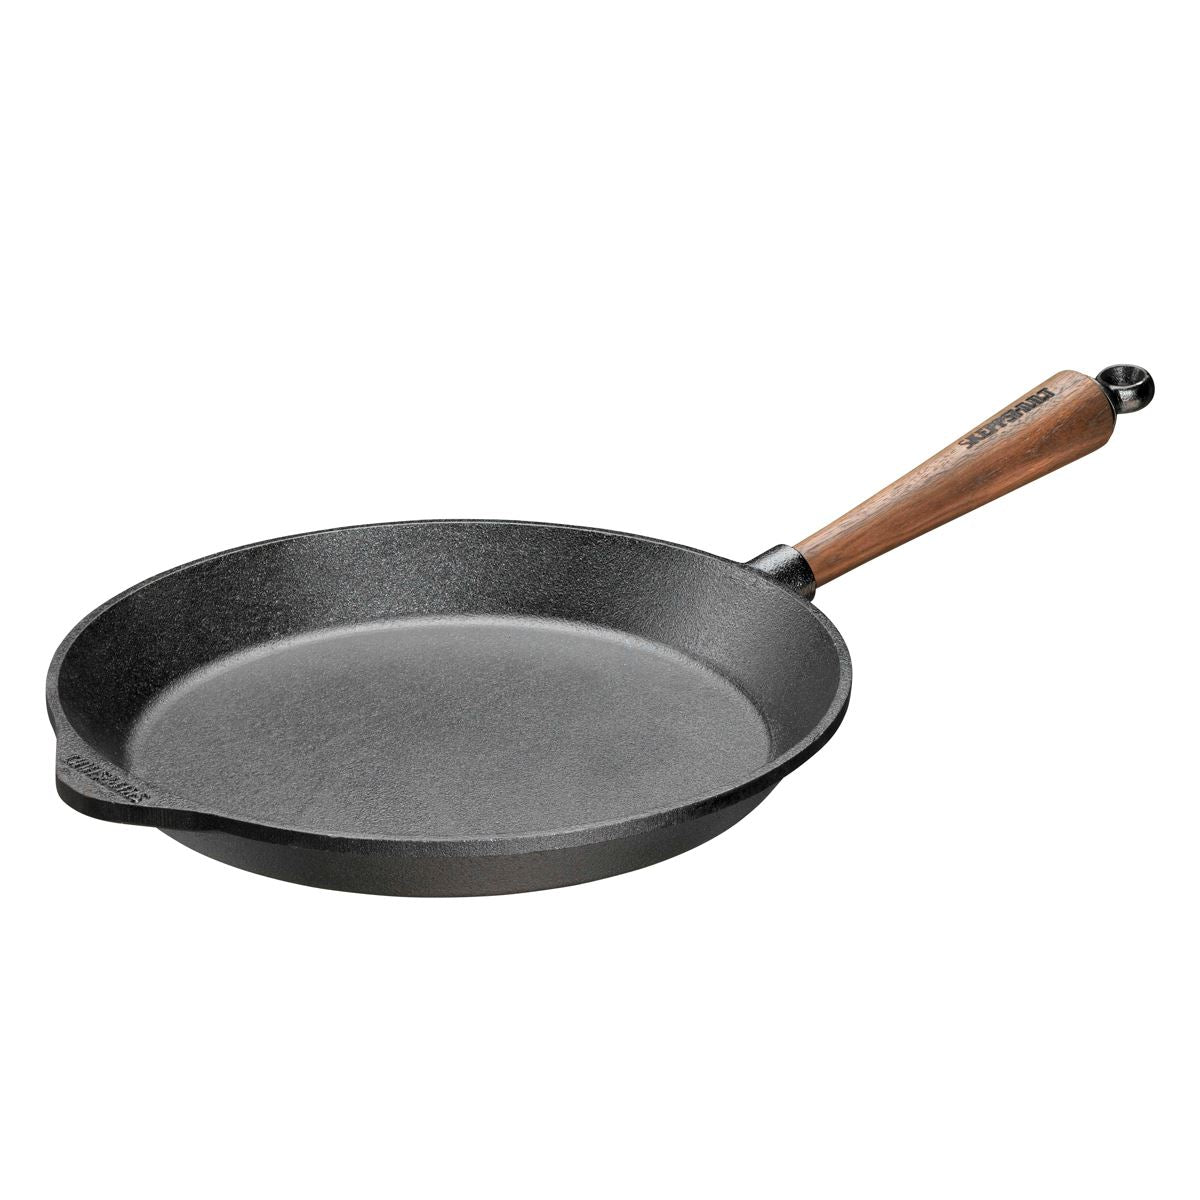 Skeppshult, Swedish Cast Iron Frying Pan, 9.5 inch, - Placewares